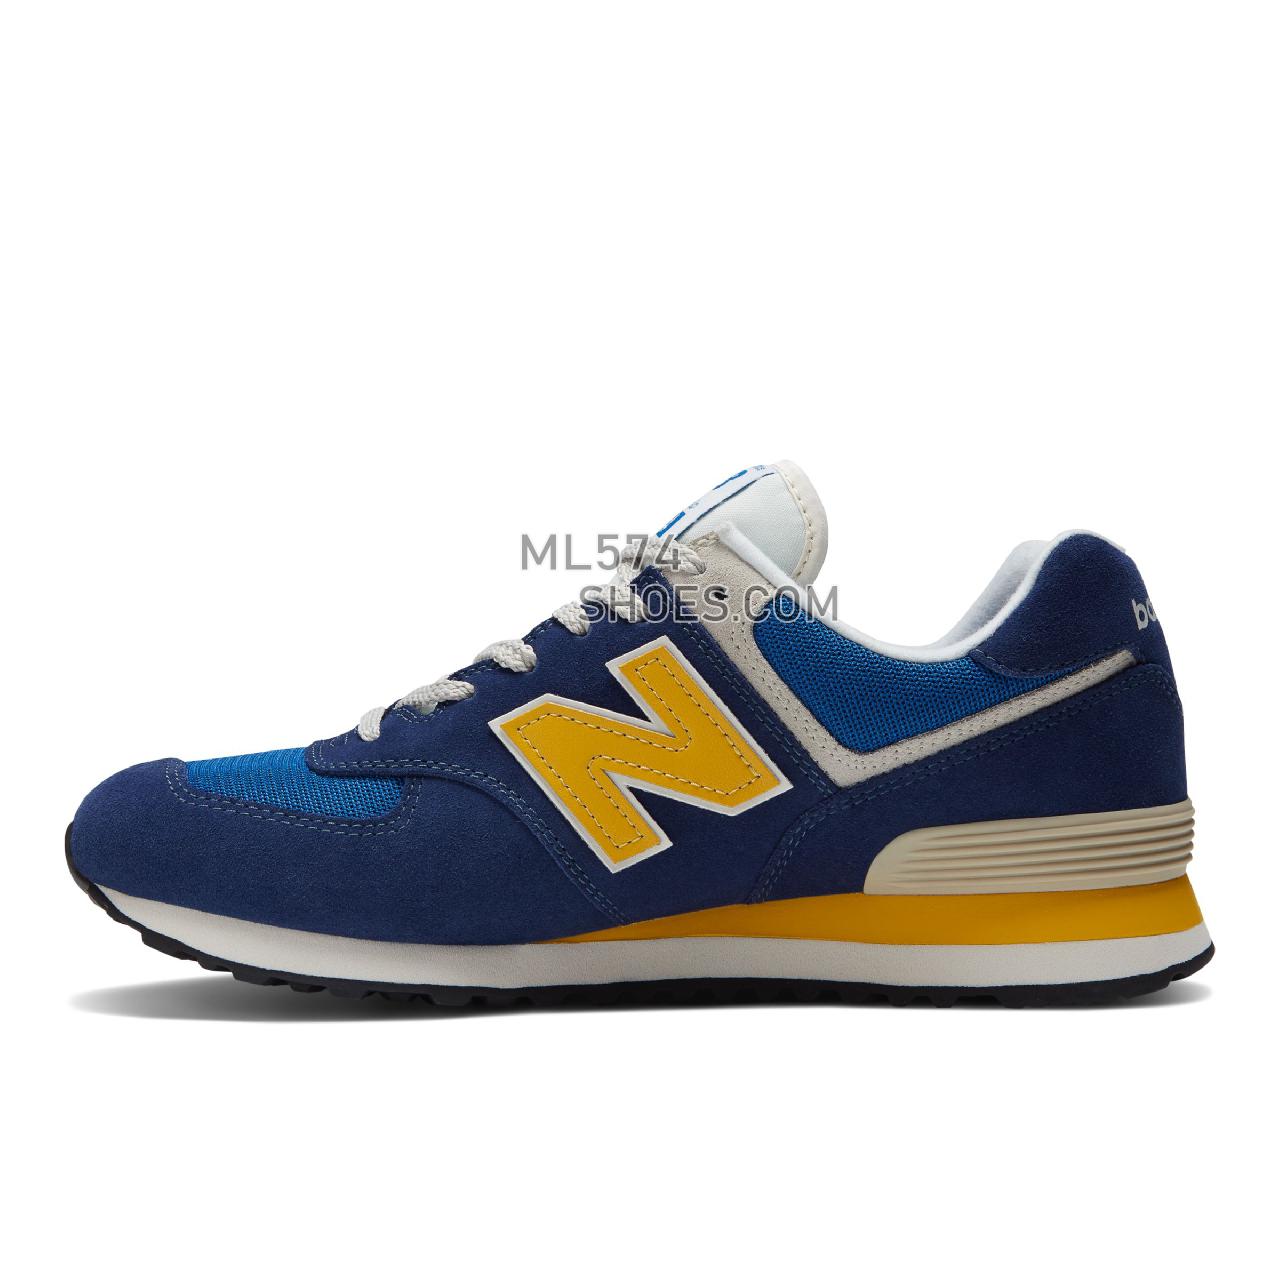 New Balance 574v2 - Unisex Men's Women's Classic Sneakers - Navy with Yellow - ML574OR2